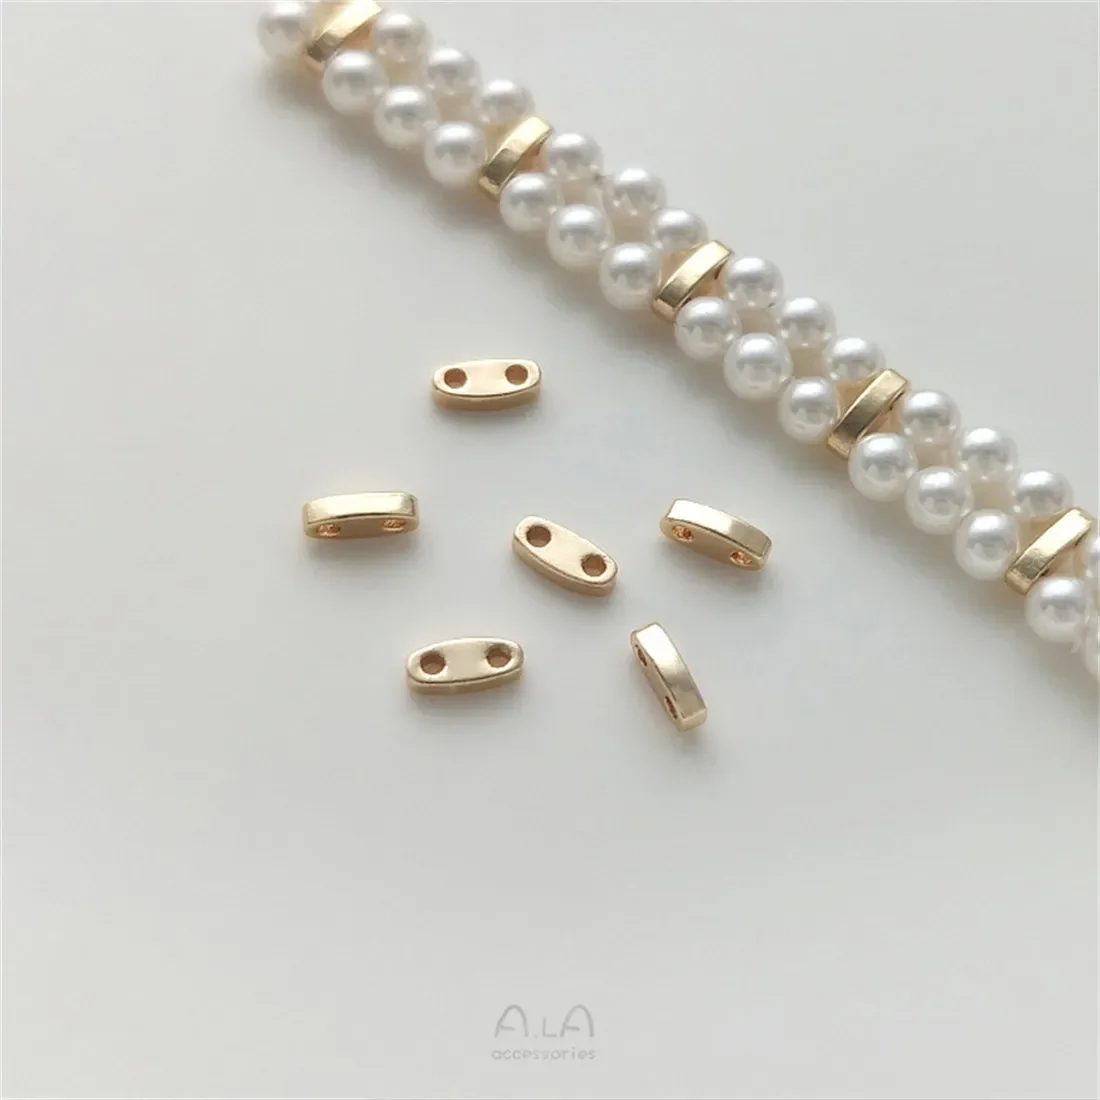 14K Gold-coated Double-row Millet Bead Spacer Accessories Double-hole Spacer Diy Handmade Beaded Bracelet Jewelry Materials C279